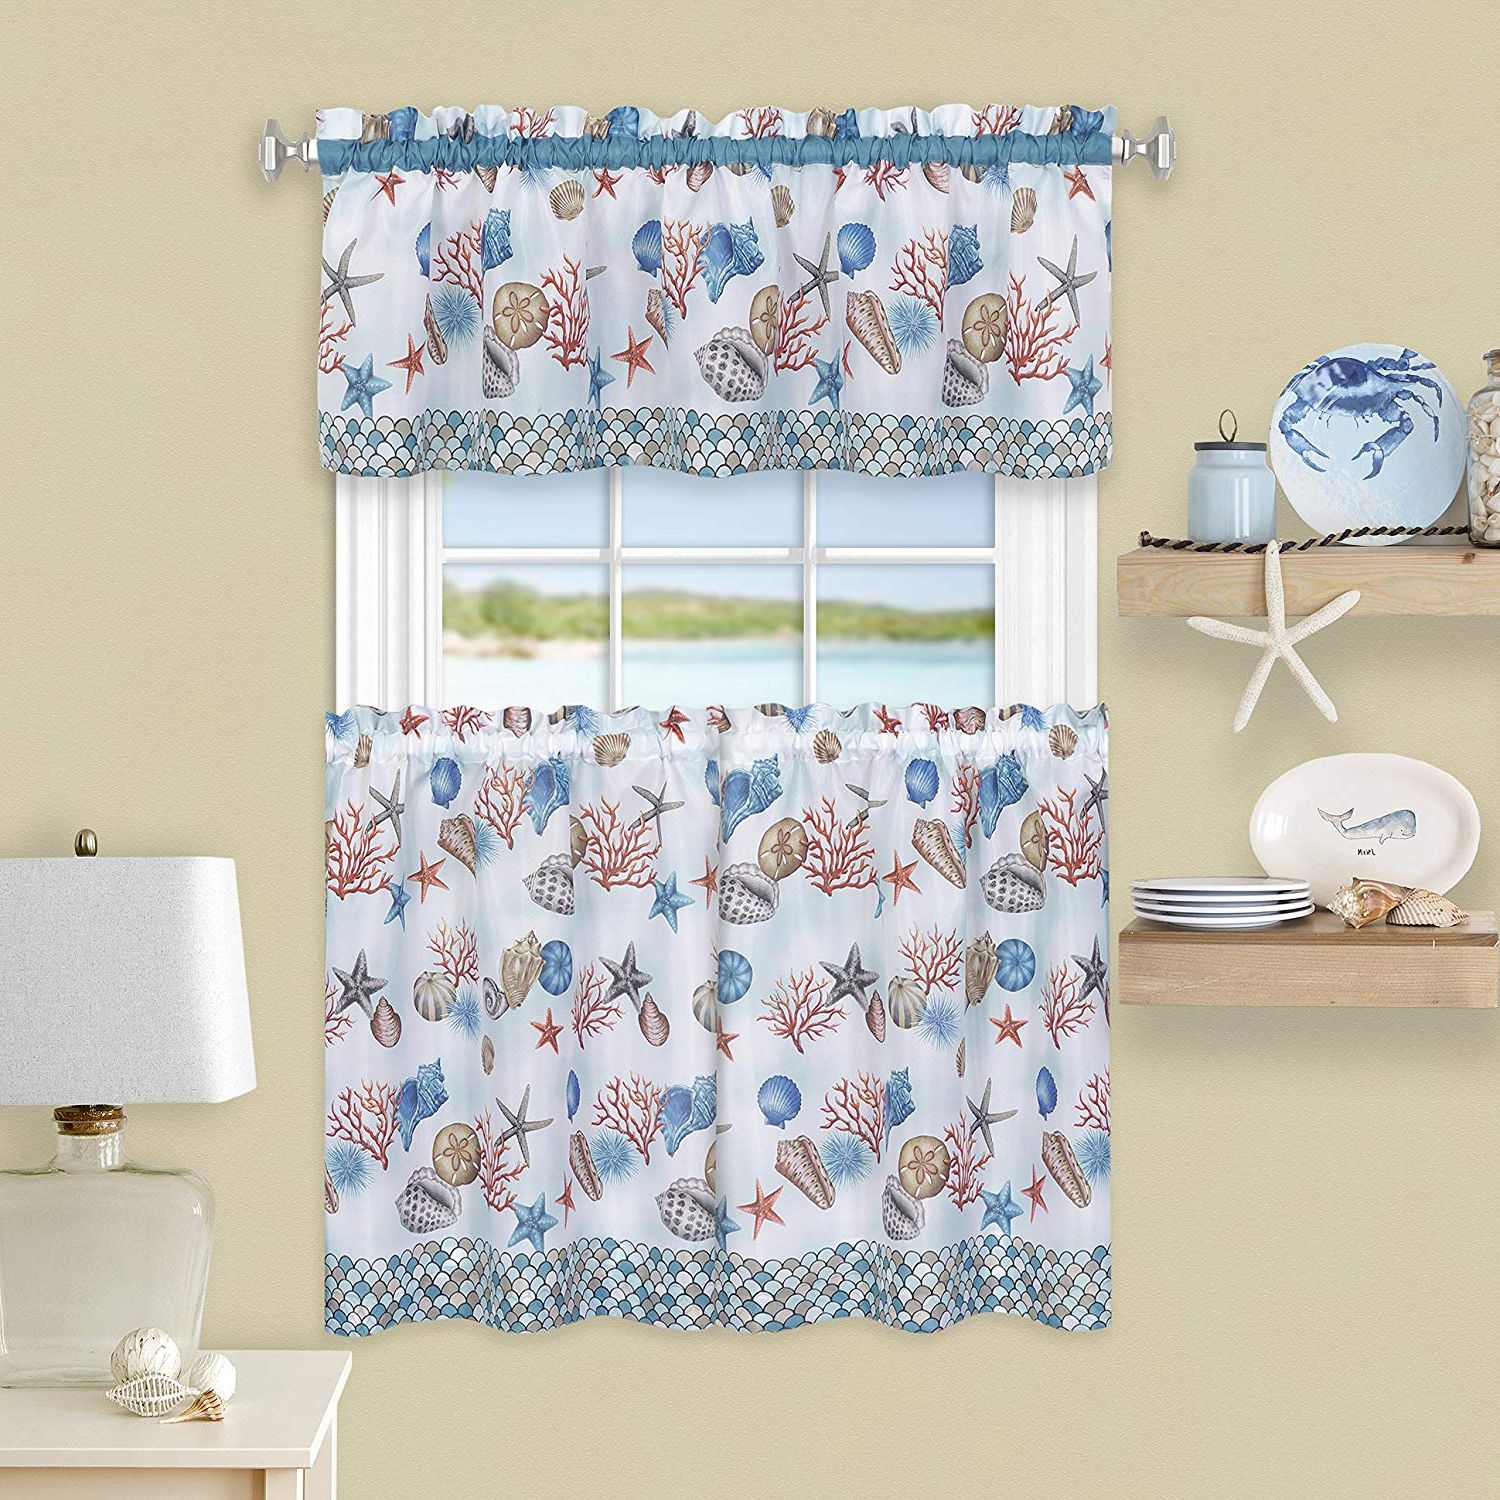 Top 20 of Coastal Tier and Valance Window Curtain Sets